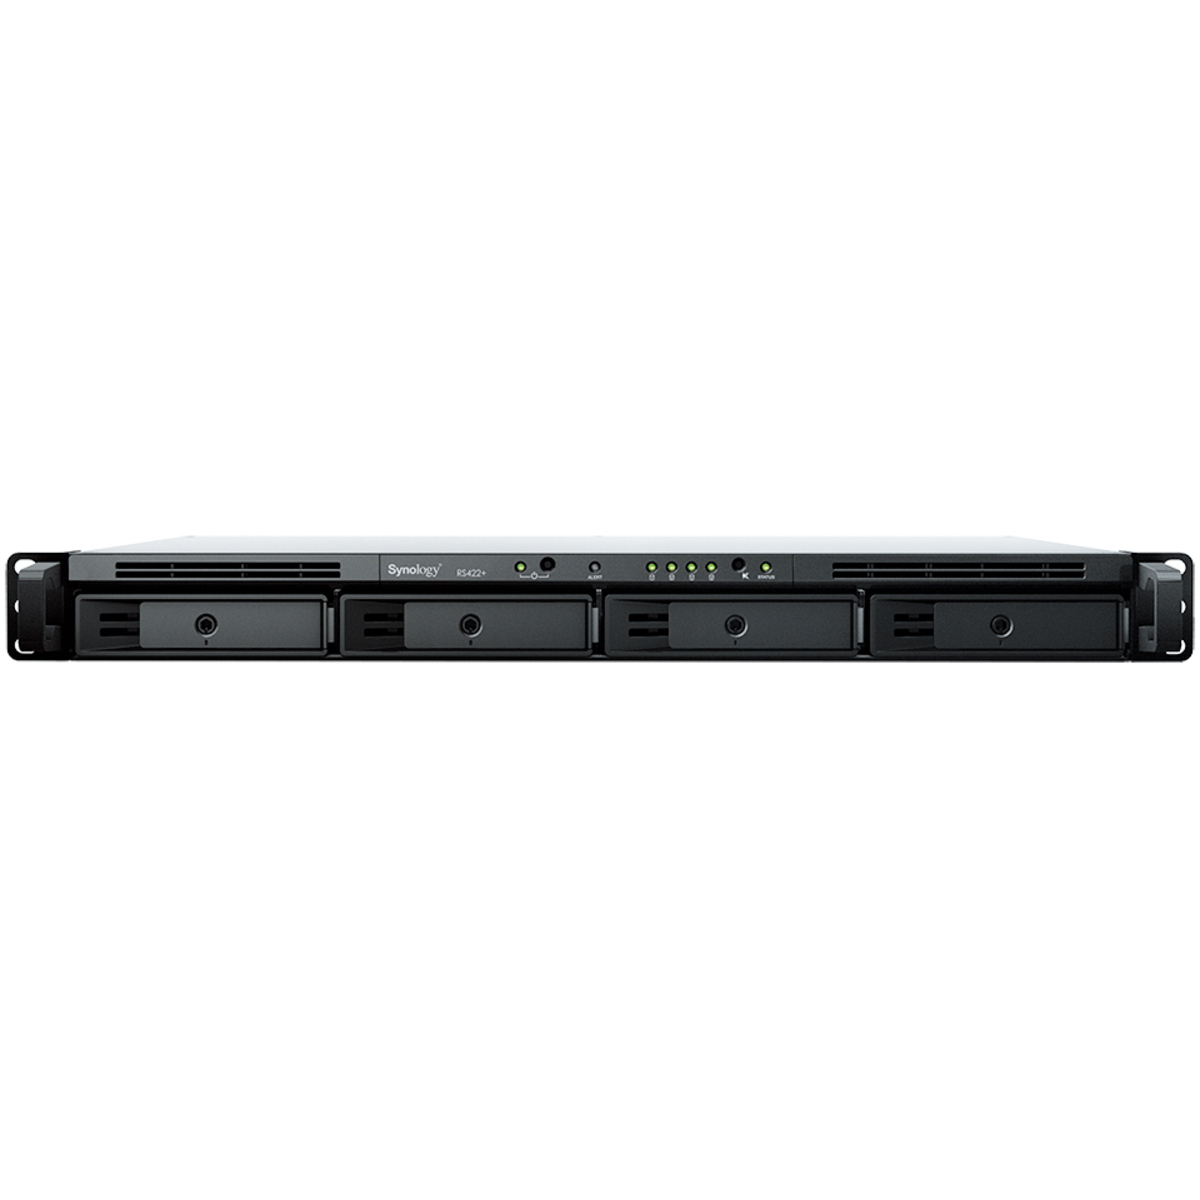 Synology RackStation RS422+ 24tb 4-Bay RackMount Personal / Basic Home / Small Office NAS - Network Attached Storage Device 3x8tb Seagate IronWolf Pro ST8000NT001 3.5 7200rpm SATA 6Gb/s HDD NAS Class Drives Installed - Burn-In Tested - ON SALE RackStation RS422+